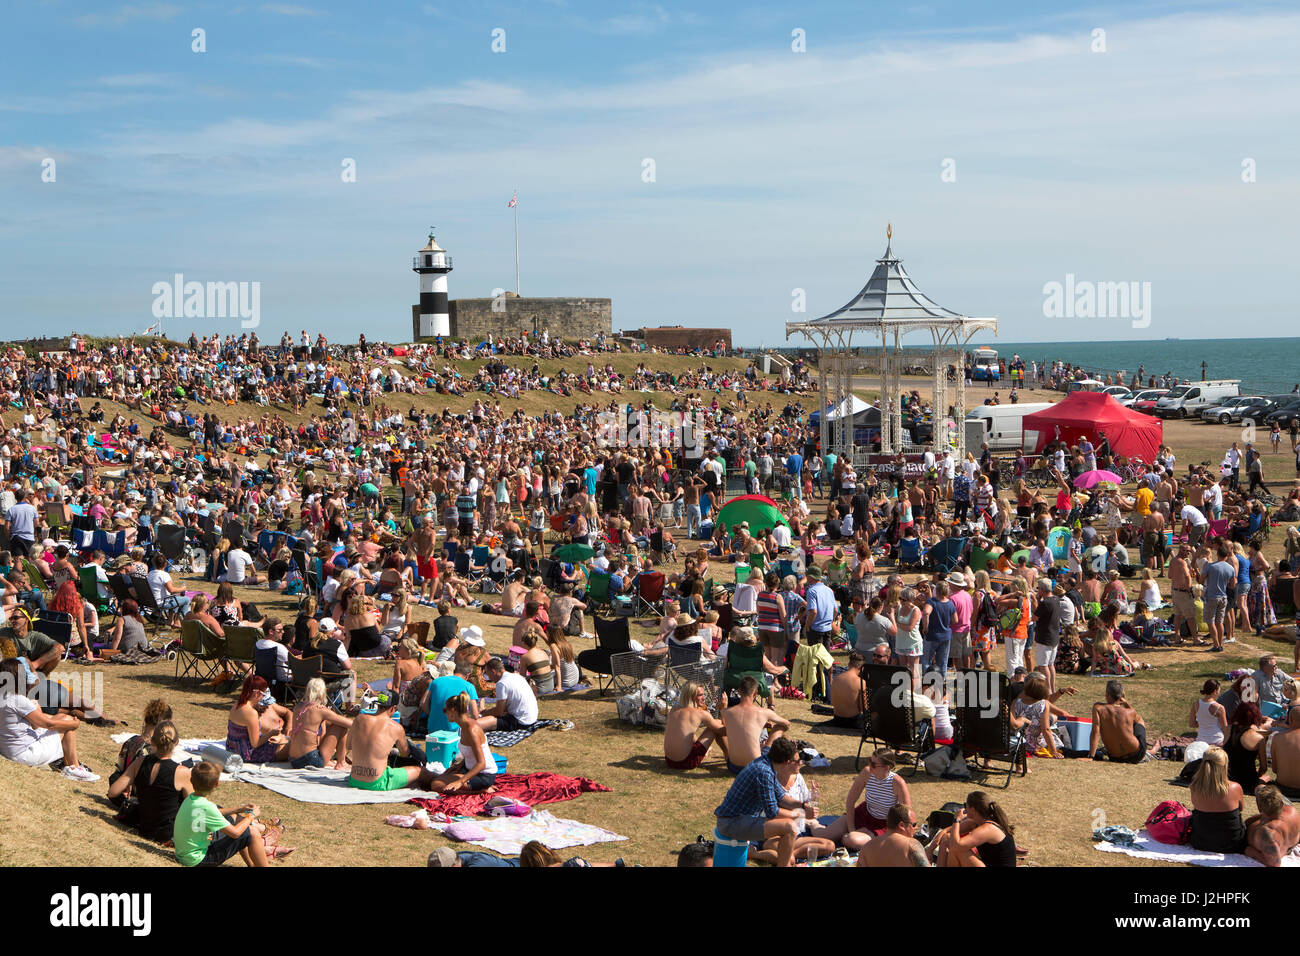 Huge crowd at the Bandstand at Southsea during one of the many free events held in 2016. A great place for local talent to showcase to a summer crowd. Stock Photo